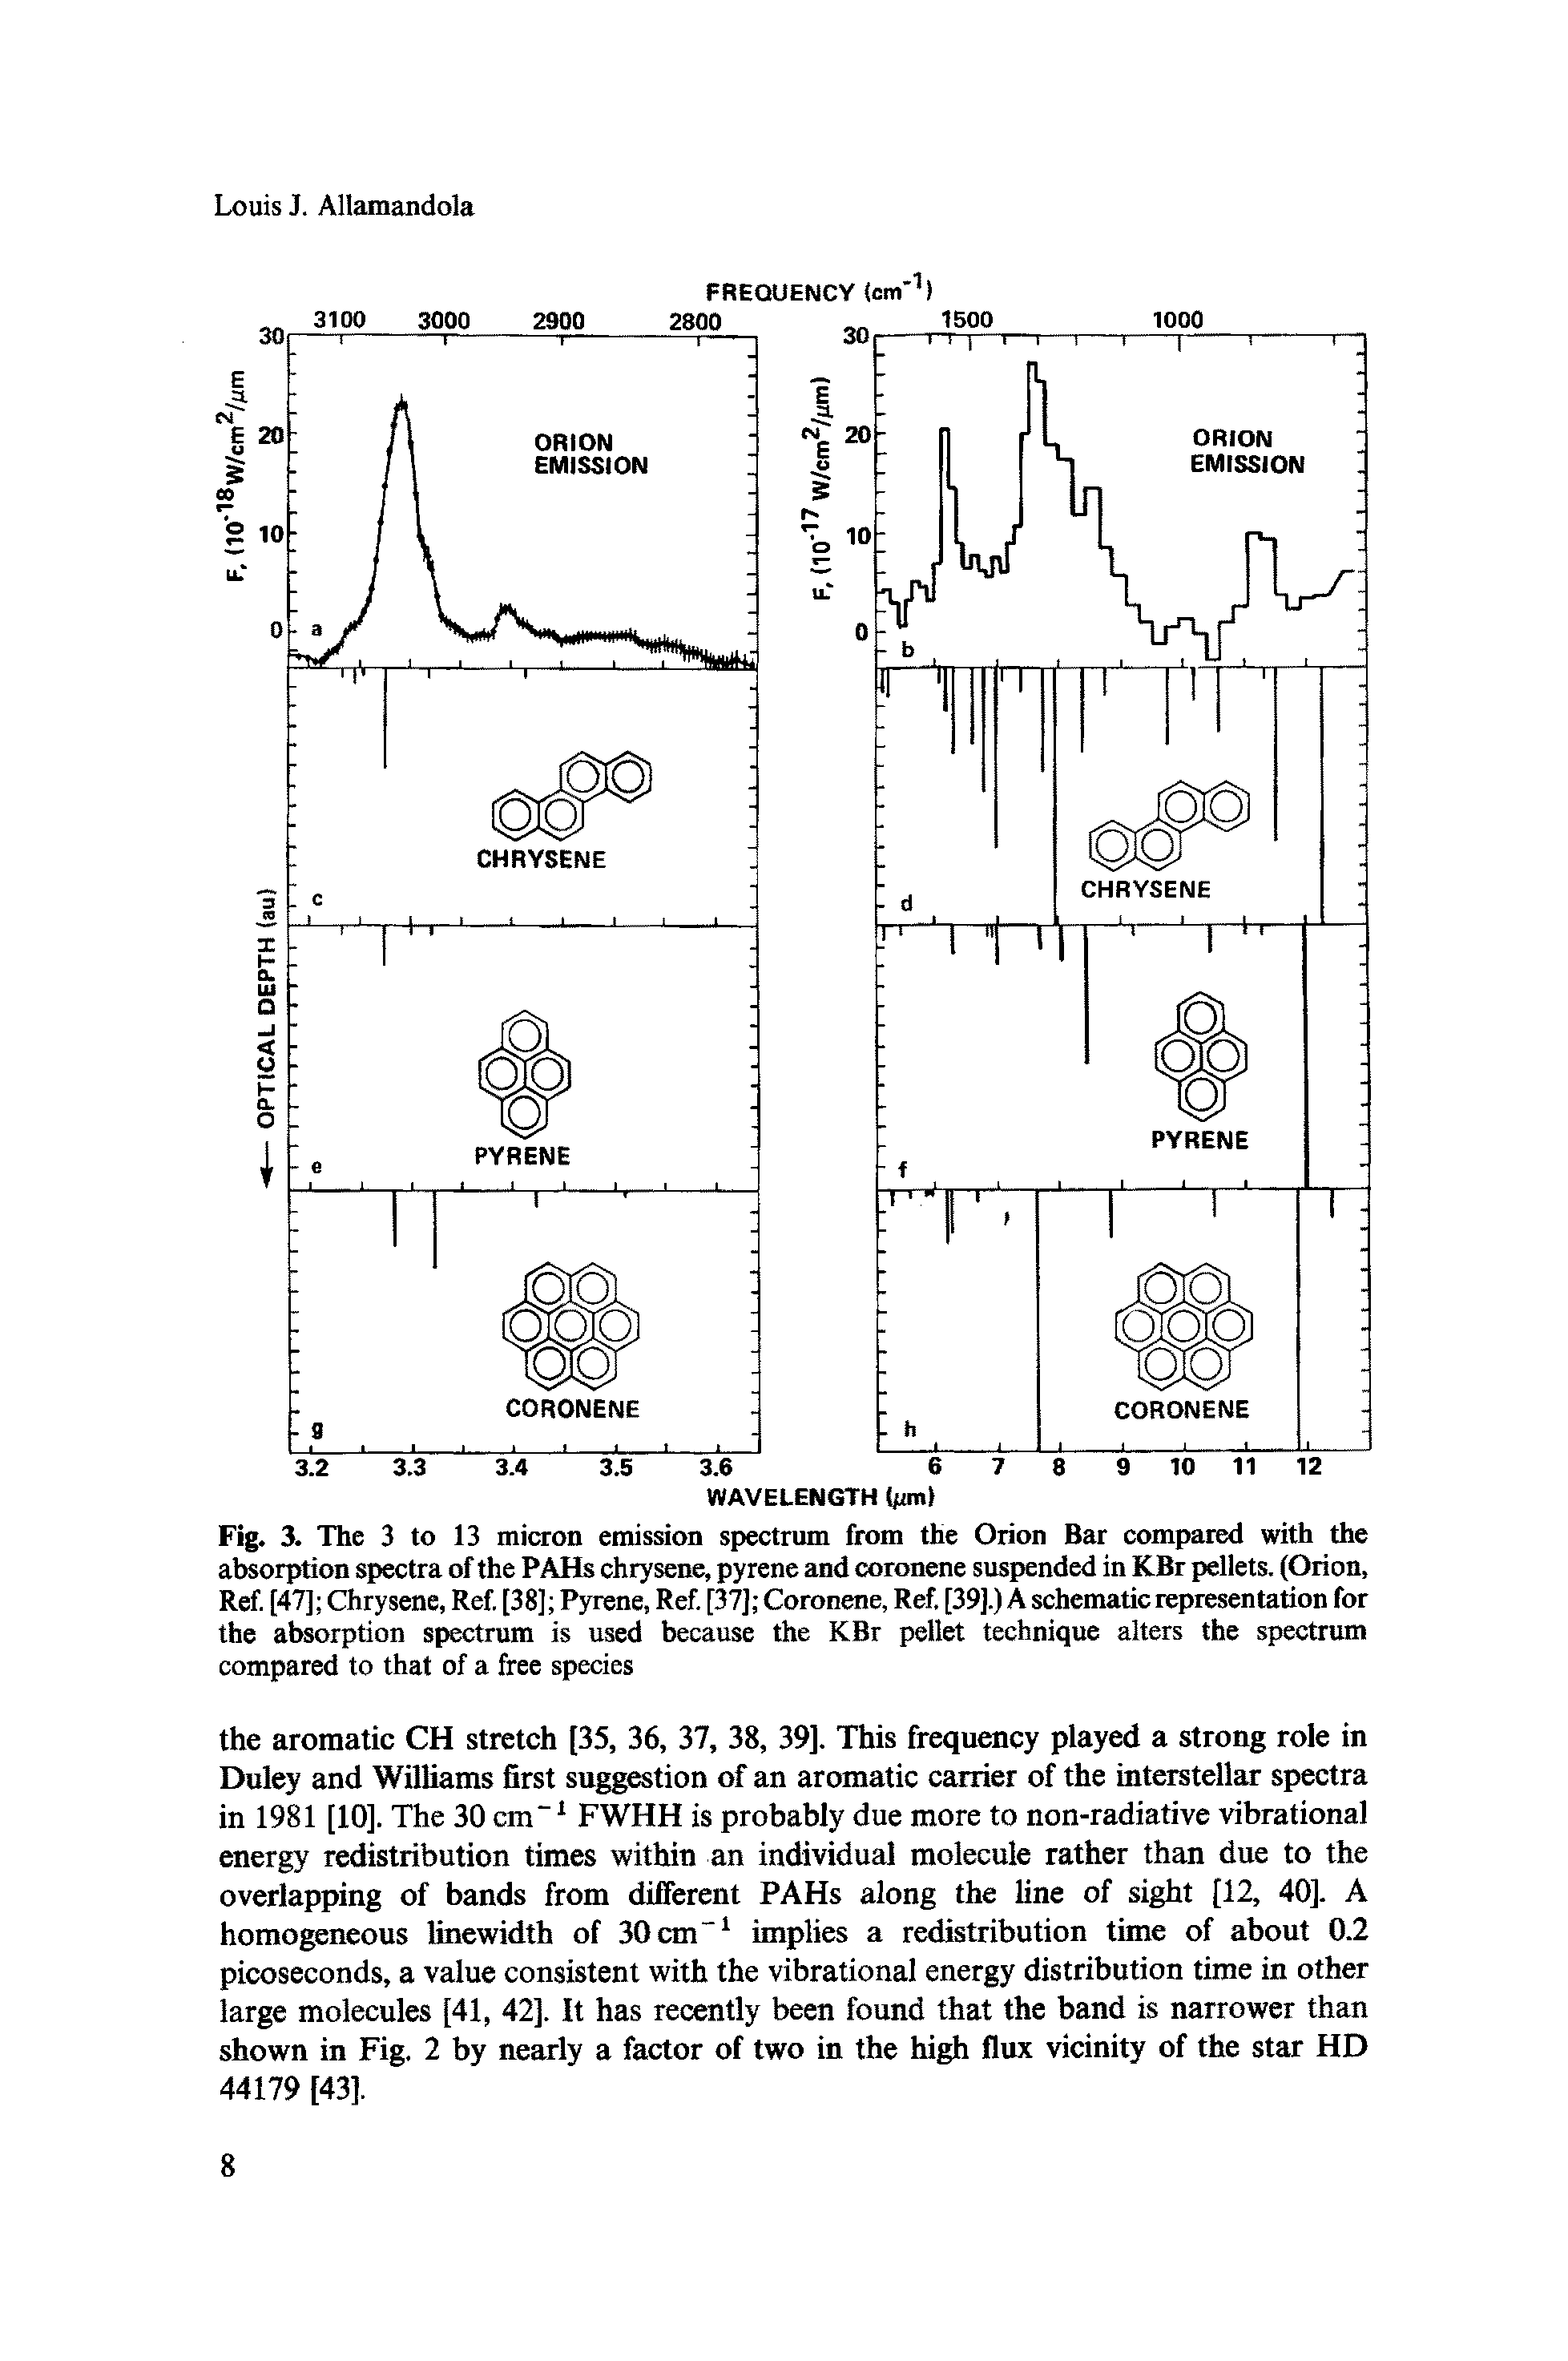 Fig. 3. The 3 to 13 micron emission spectrum from the Orion Bar compared with the absorption spectra of the PAHs chrysene, pyrene and coronene suspended in KBr pellets. (Orion, Ref. [47] Chrysene, Ref. [38] Pyrene, Ref. [37] Coronene, Ref. [39].) A schematic representation for the absorption spectrum is used because the KBr pellet technique alters the spectrum compared to that of a free species...